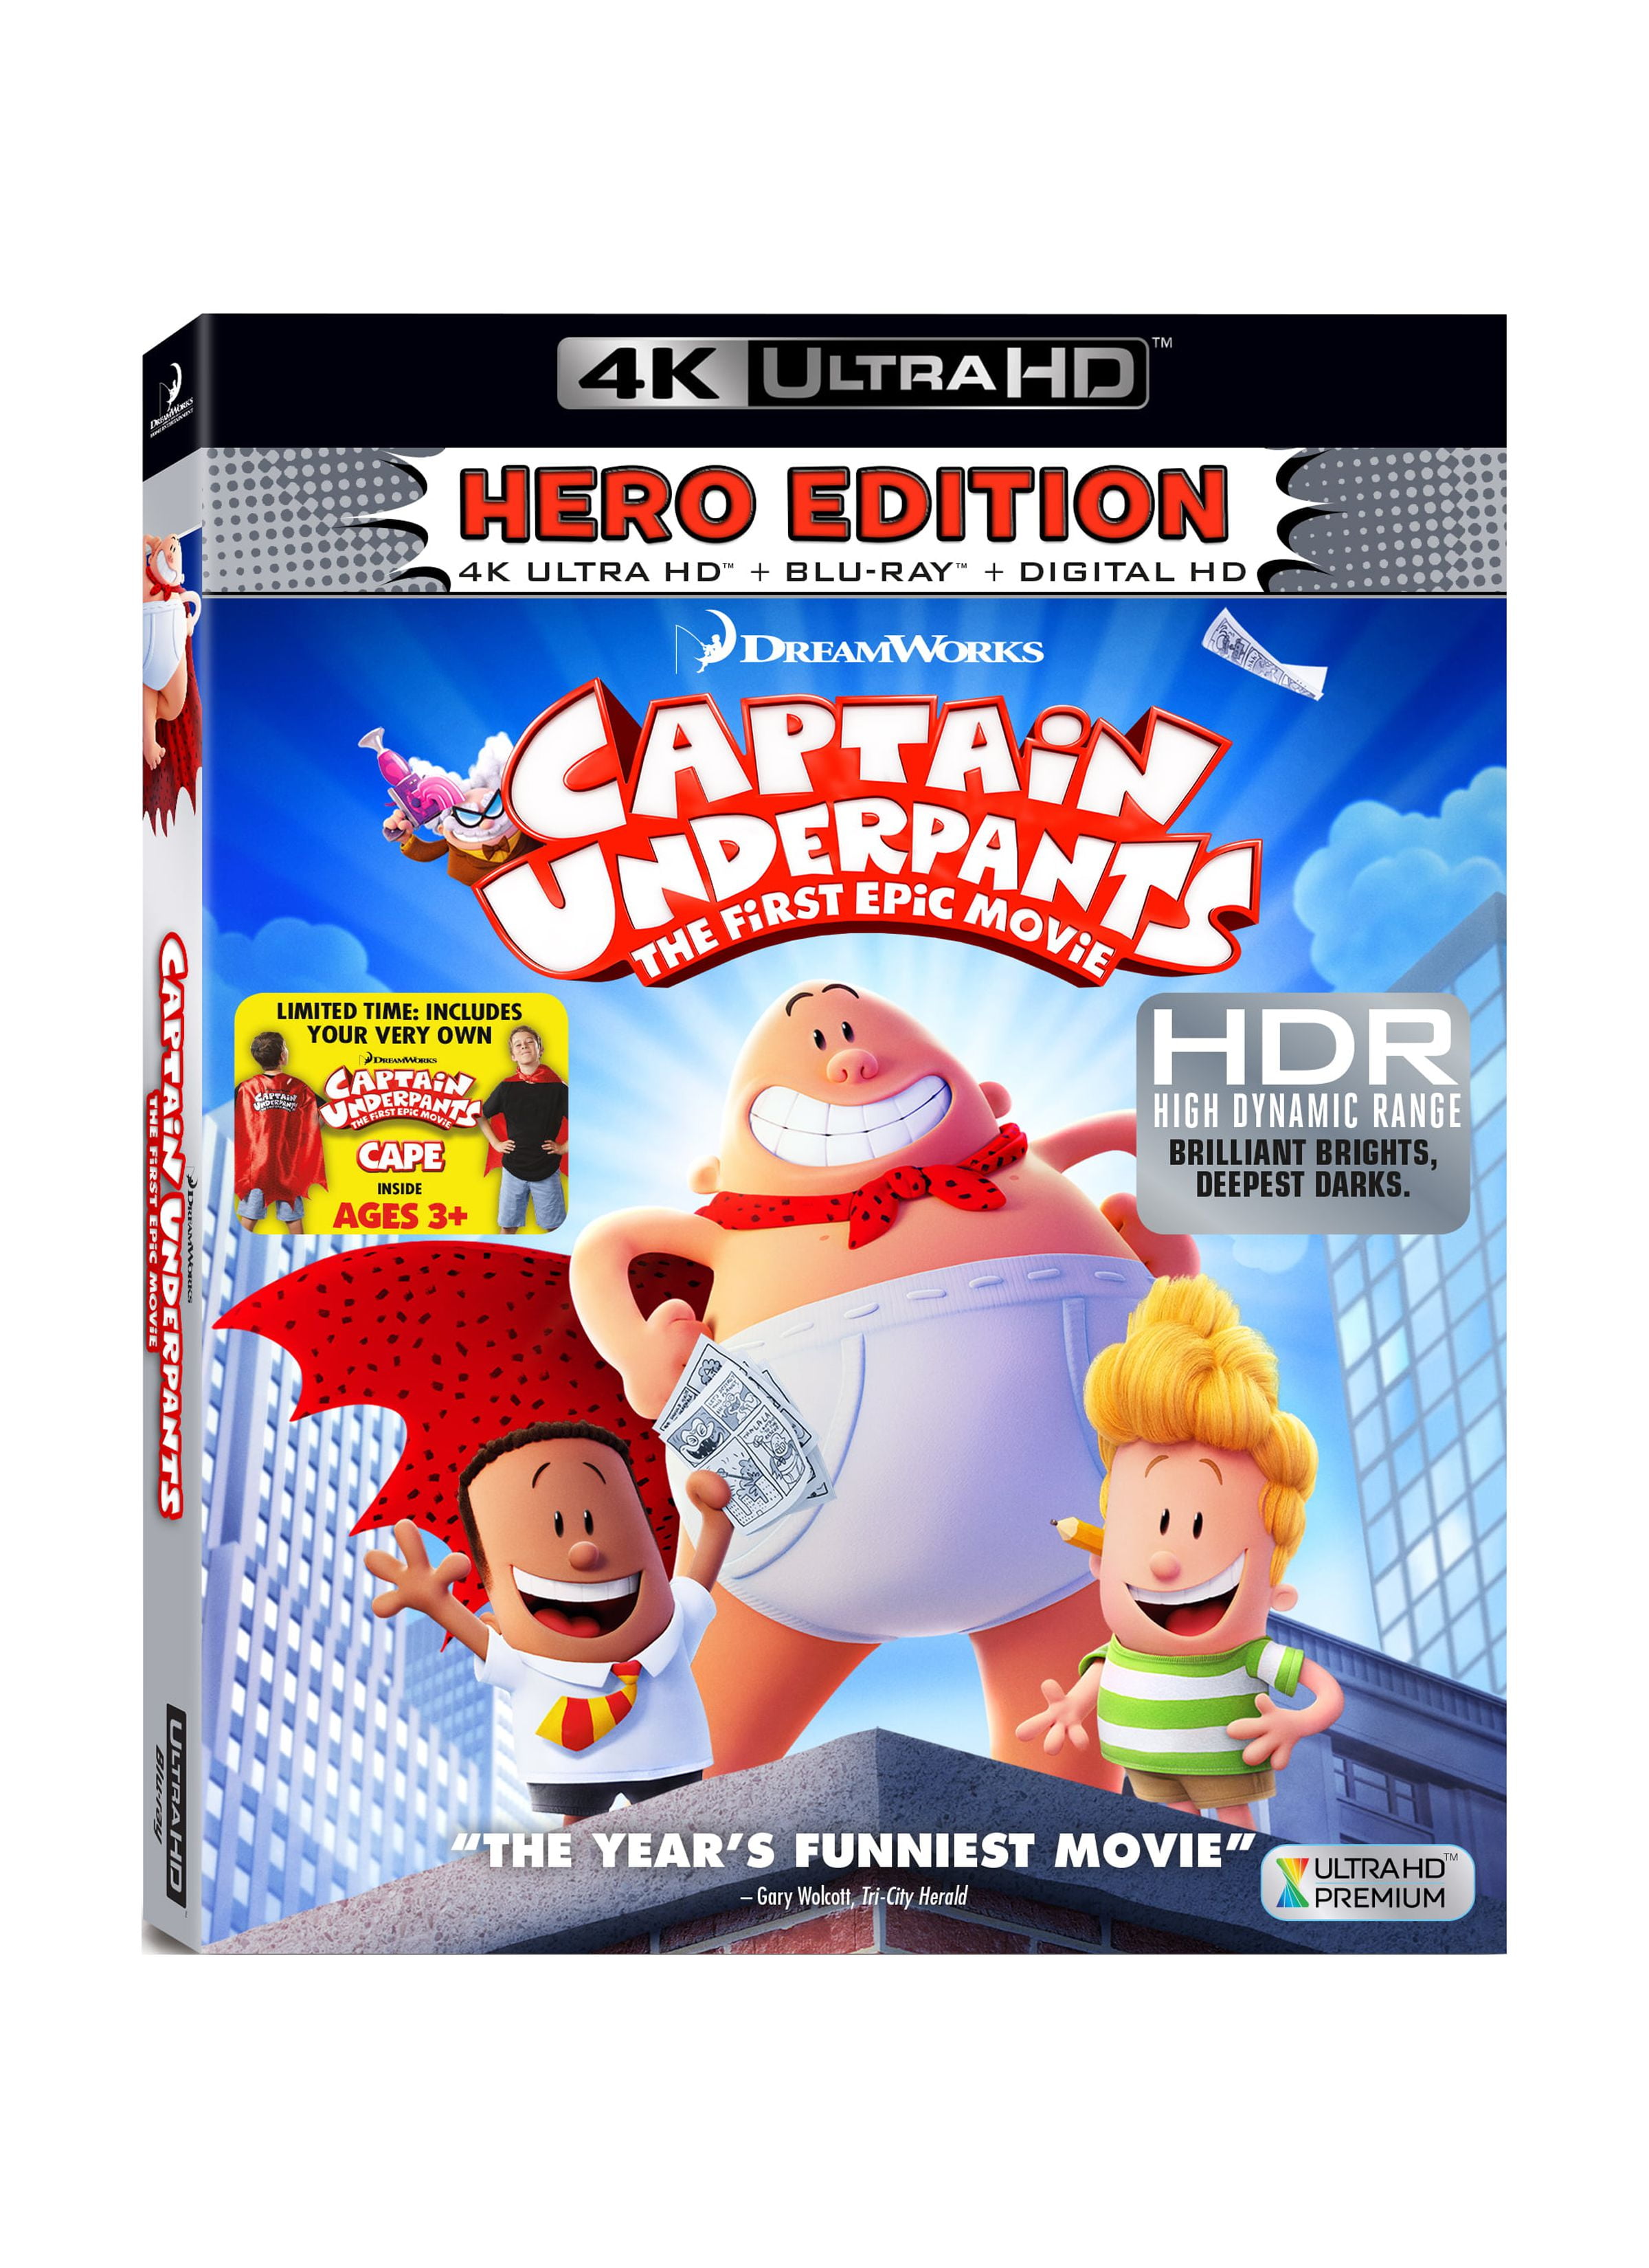 Captain Underpants: The First Epic Movie: Official Merchandise at